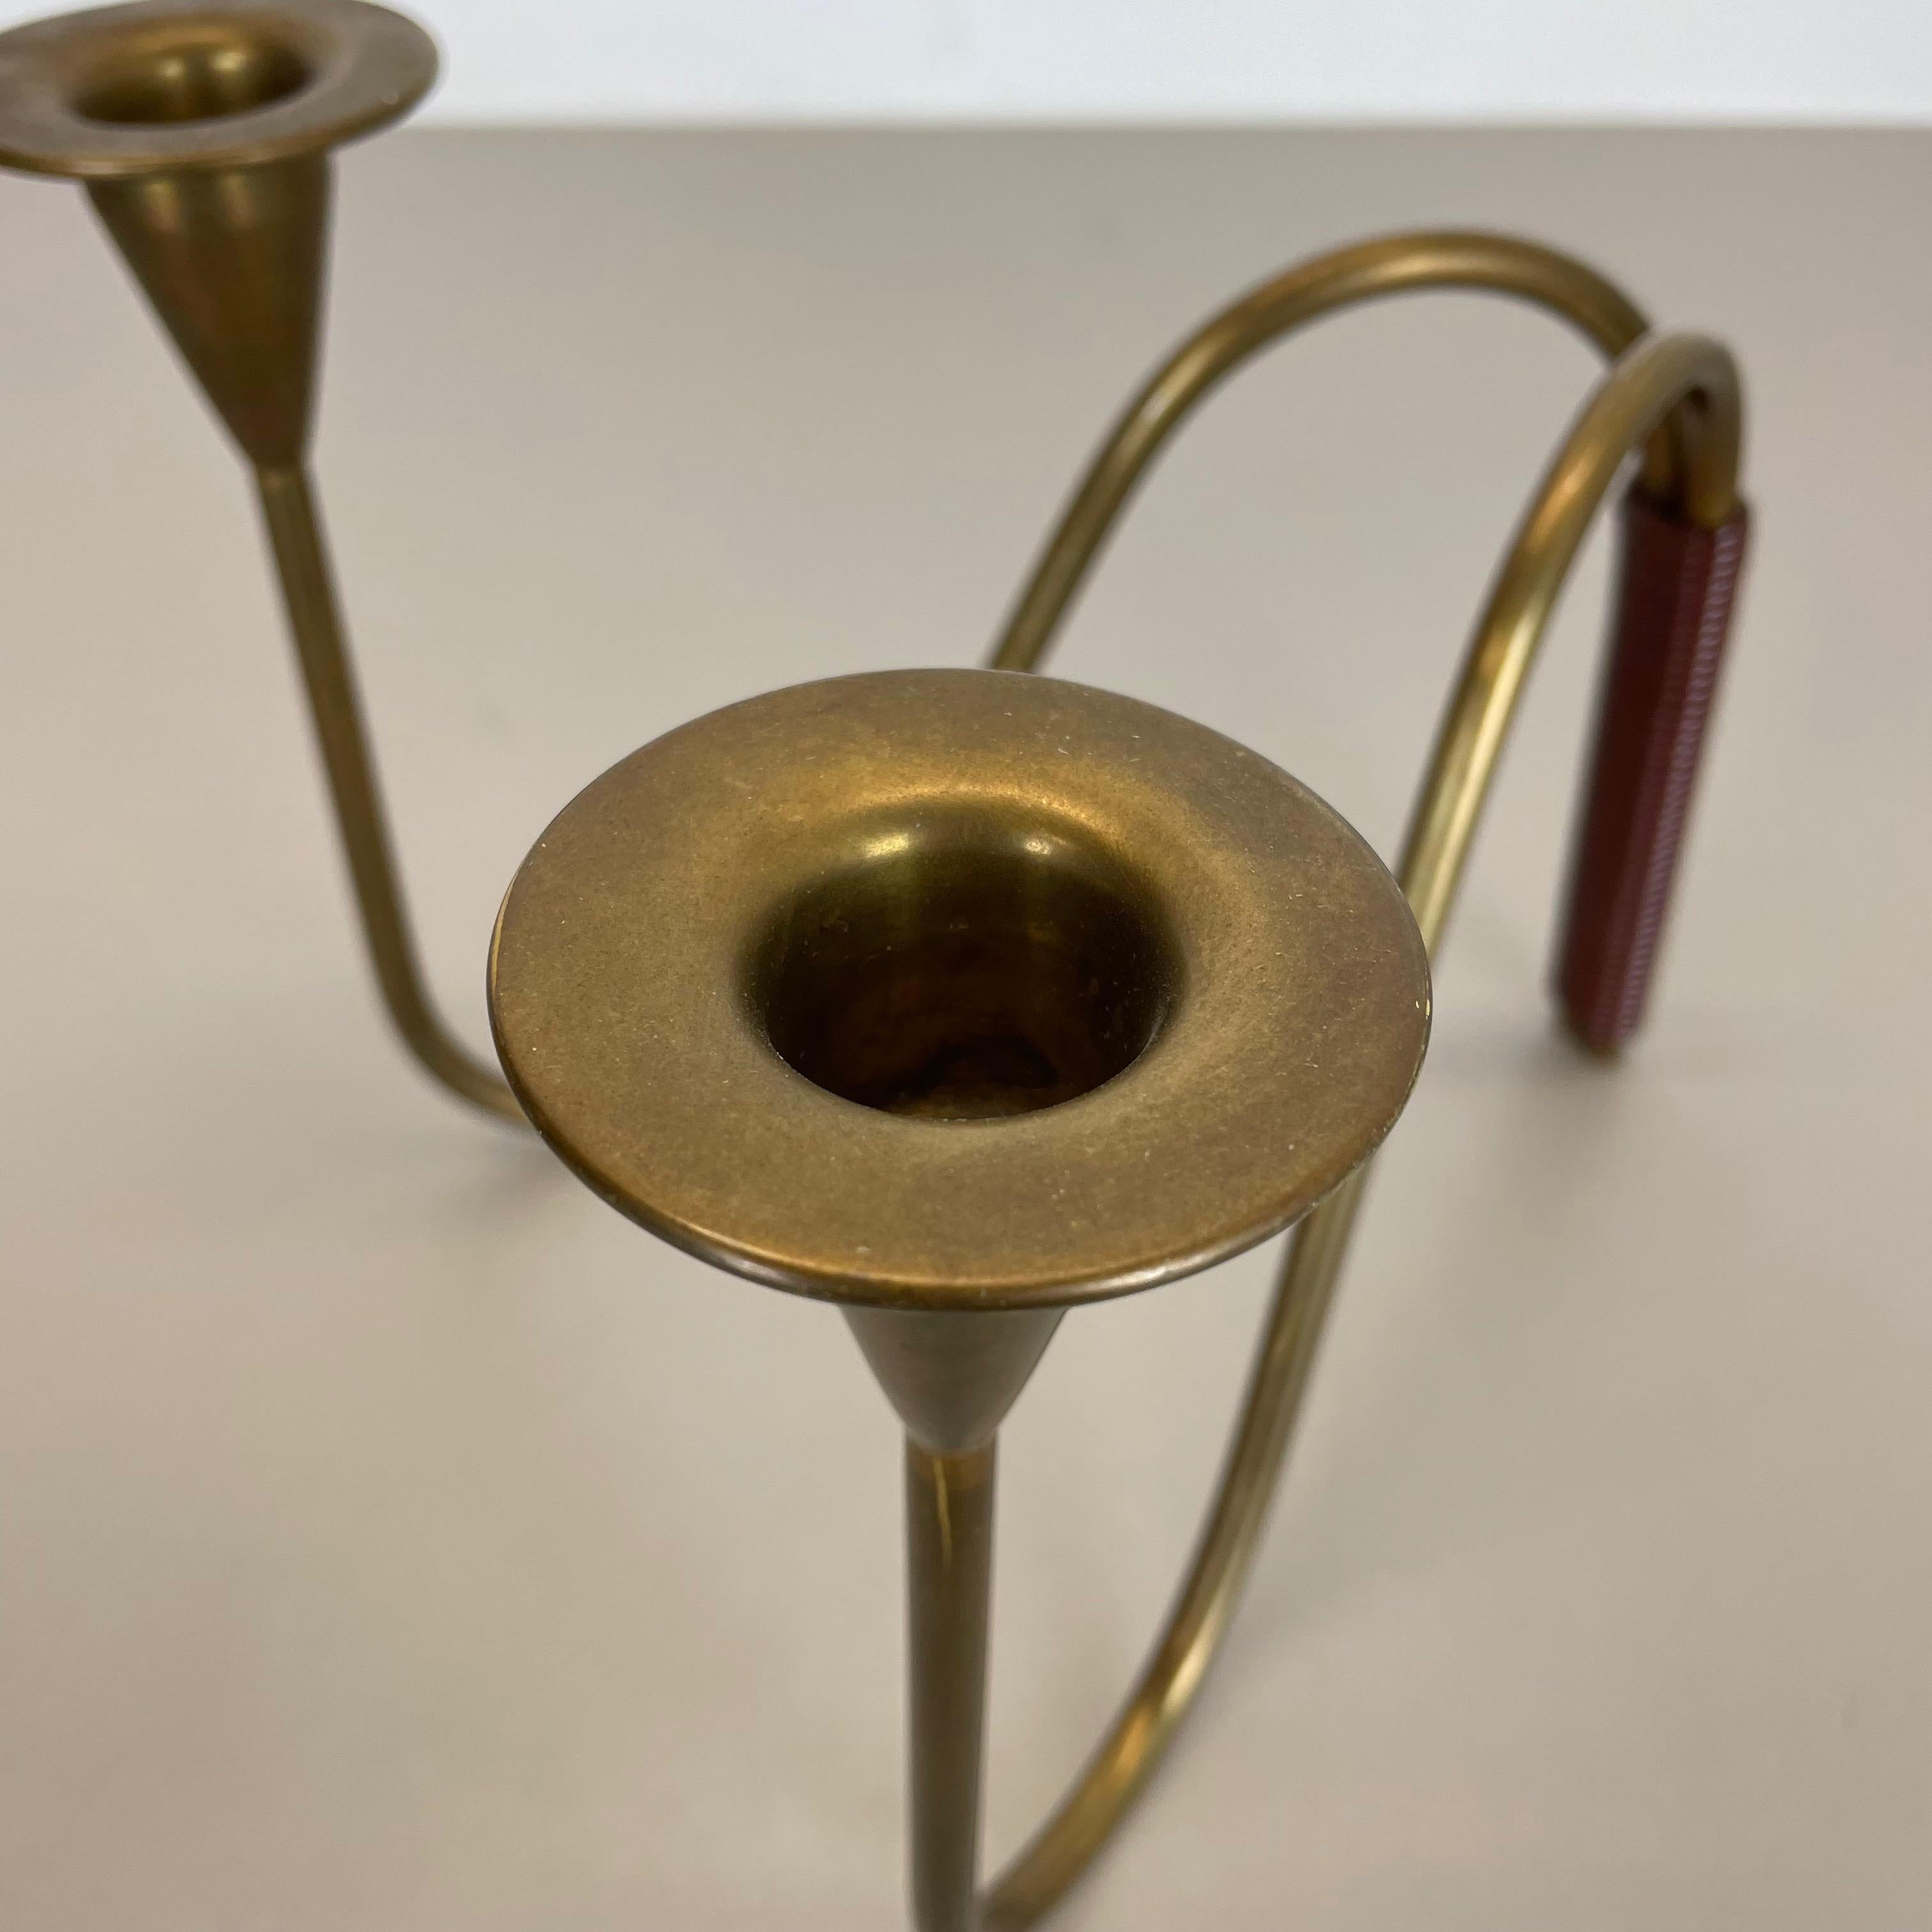 Sculptural Brass Candleholder Object by Günter Kupetz for WMF, Germany 1950s In Good Condition For Sale In Kirchlengern, DE